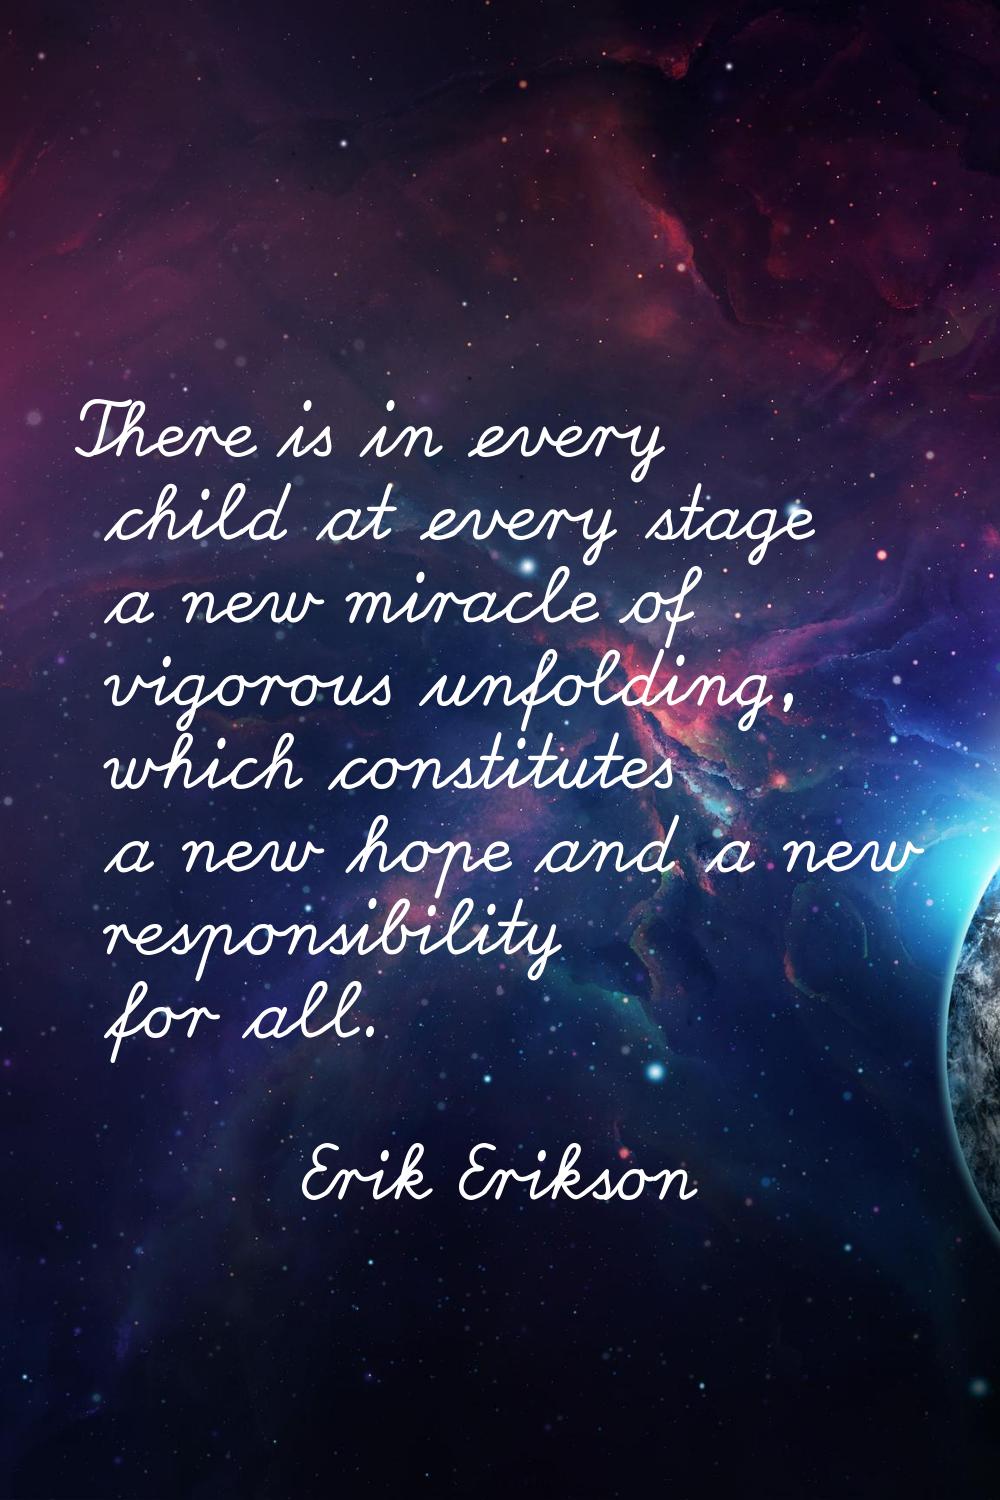 There is in every child at every stage a new miracle of vigorous unfolding, which constitutes a new